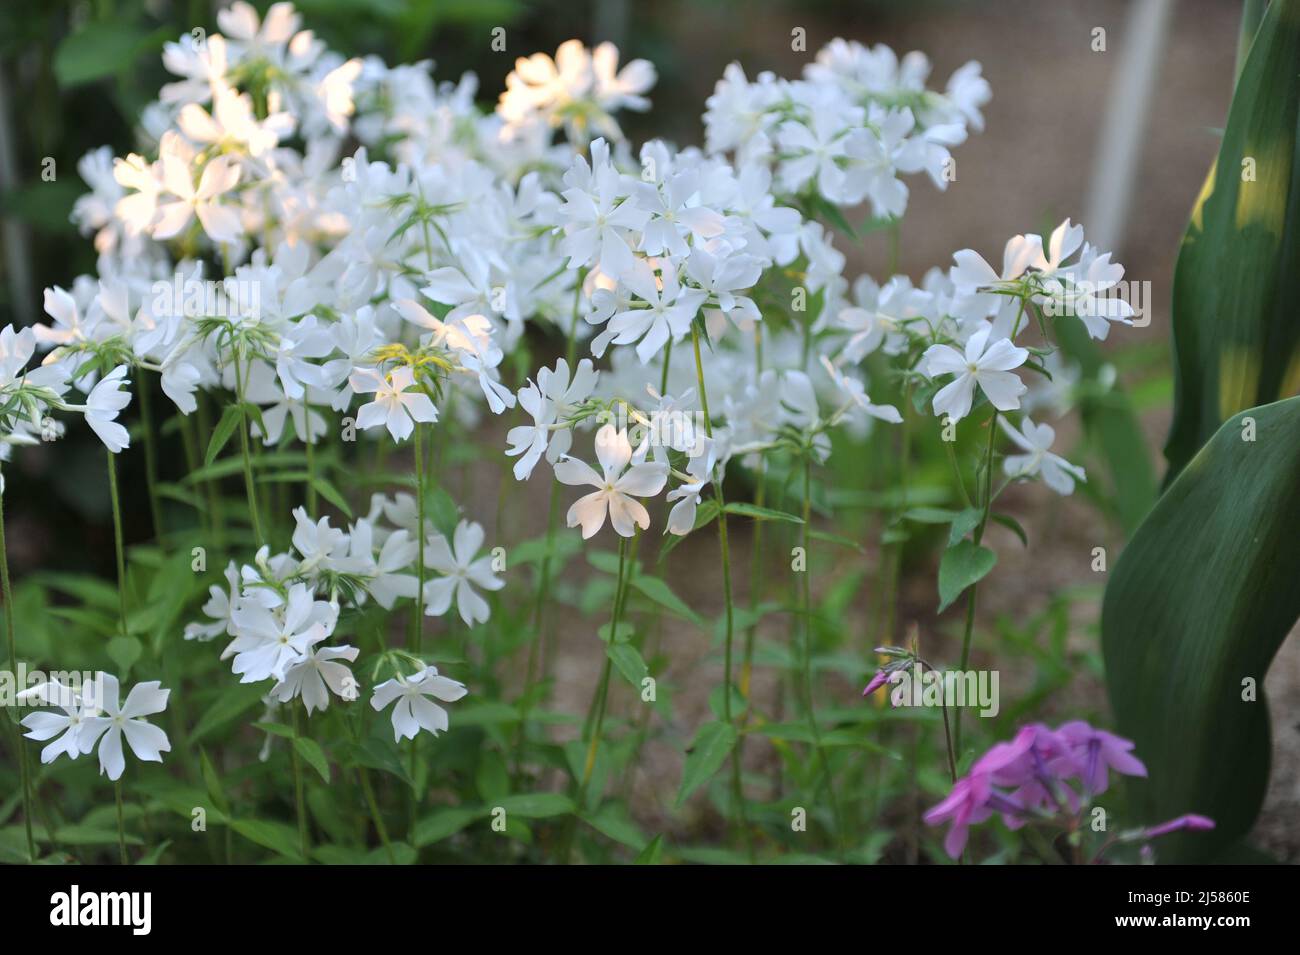 Sweet william (Phlox divaricata) Fuller's White blooms in a garden in May Stock Photo